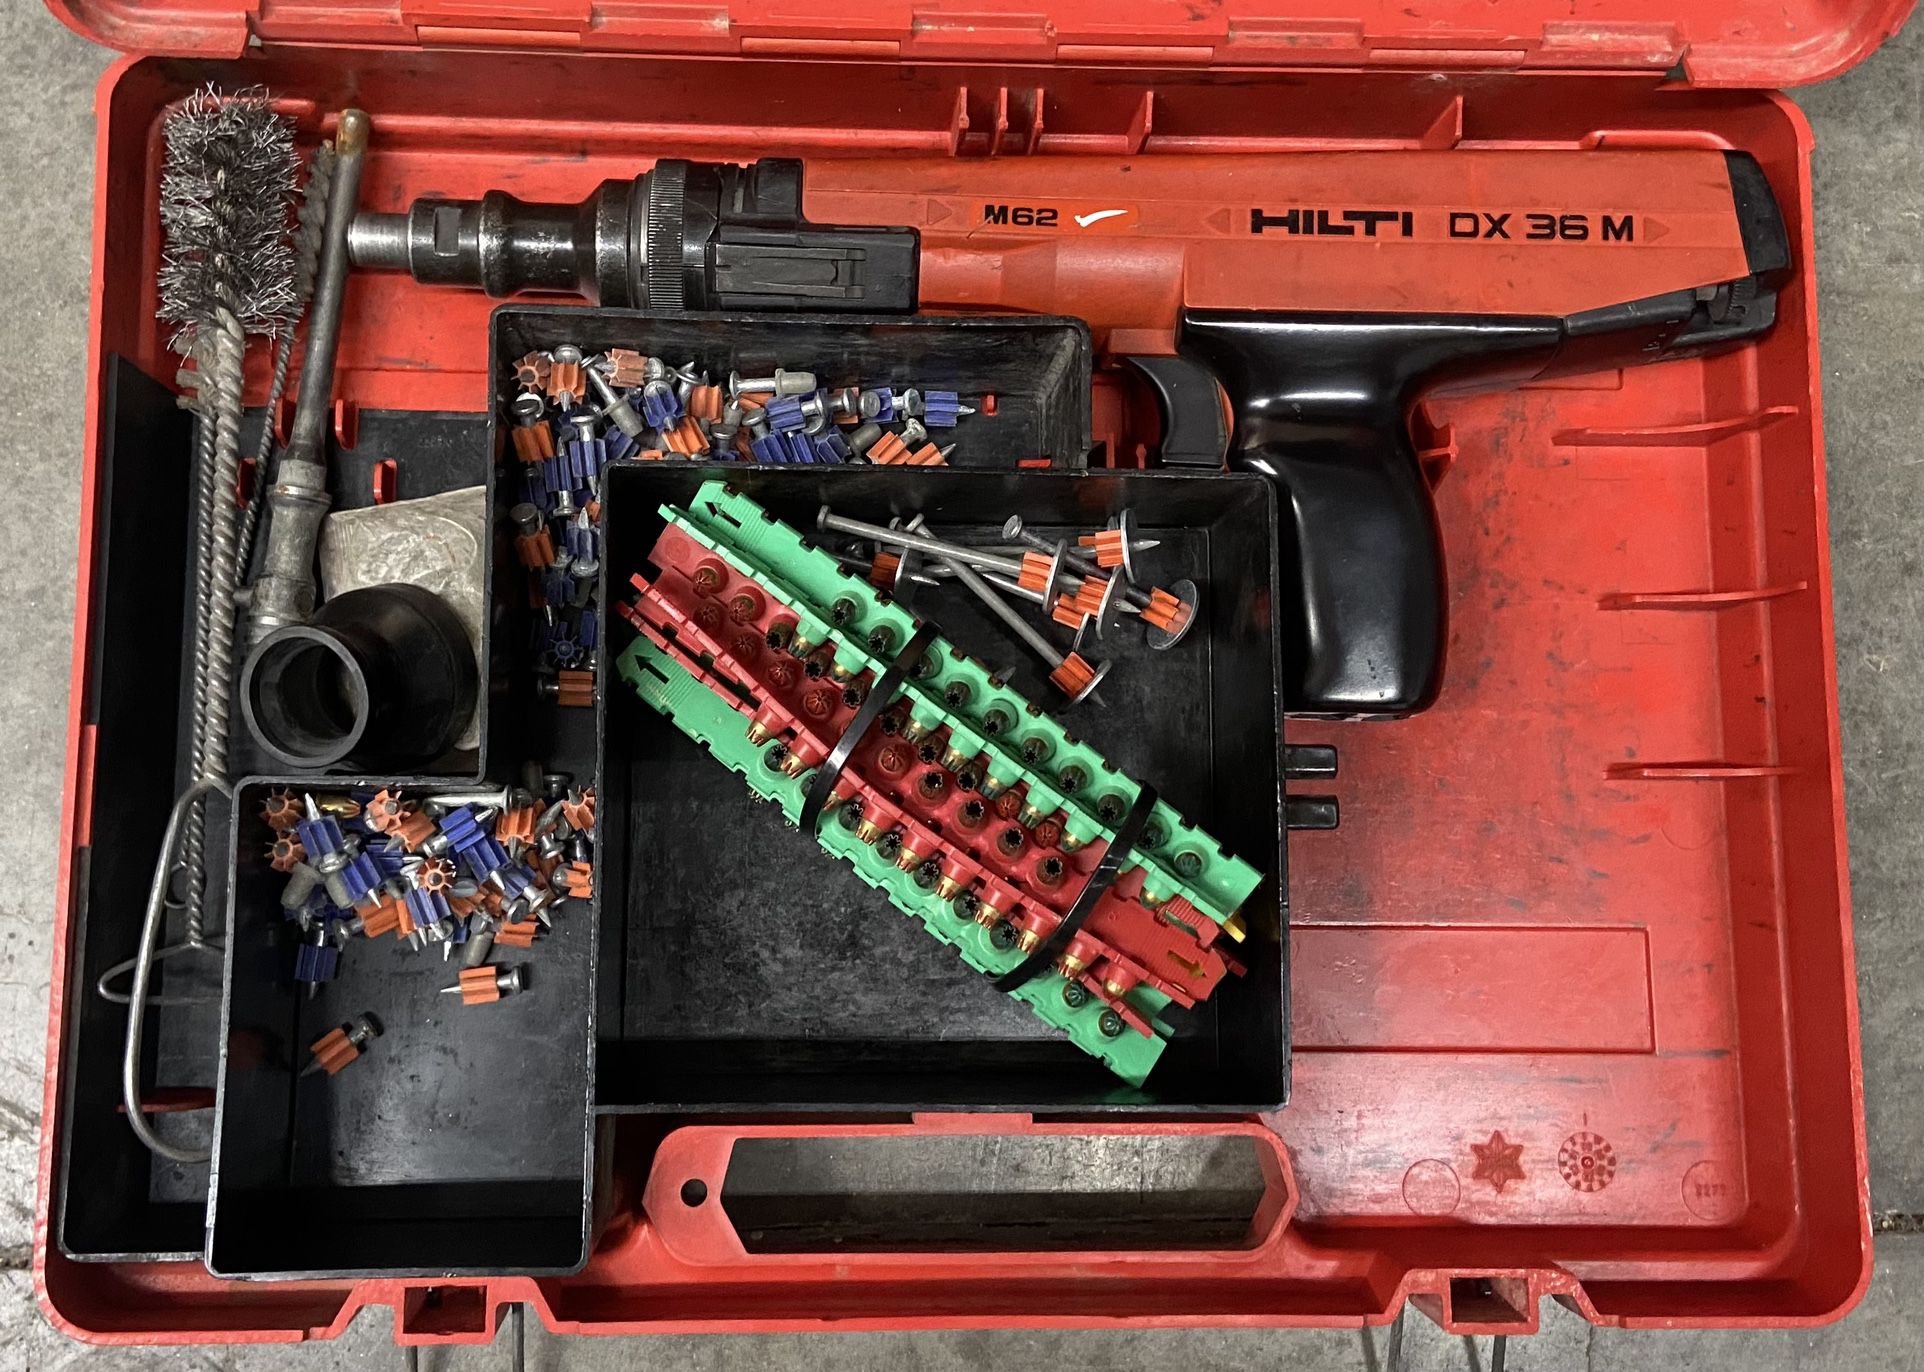 Hilti DX36M Power Actuated Tool